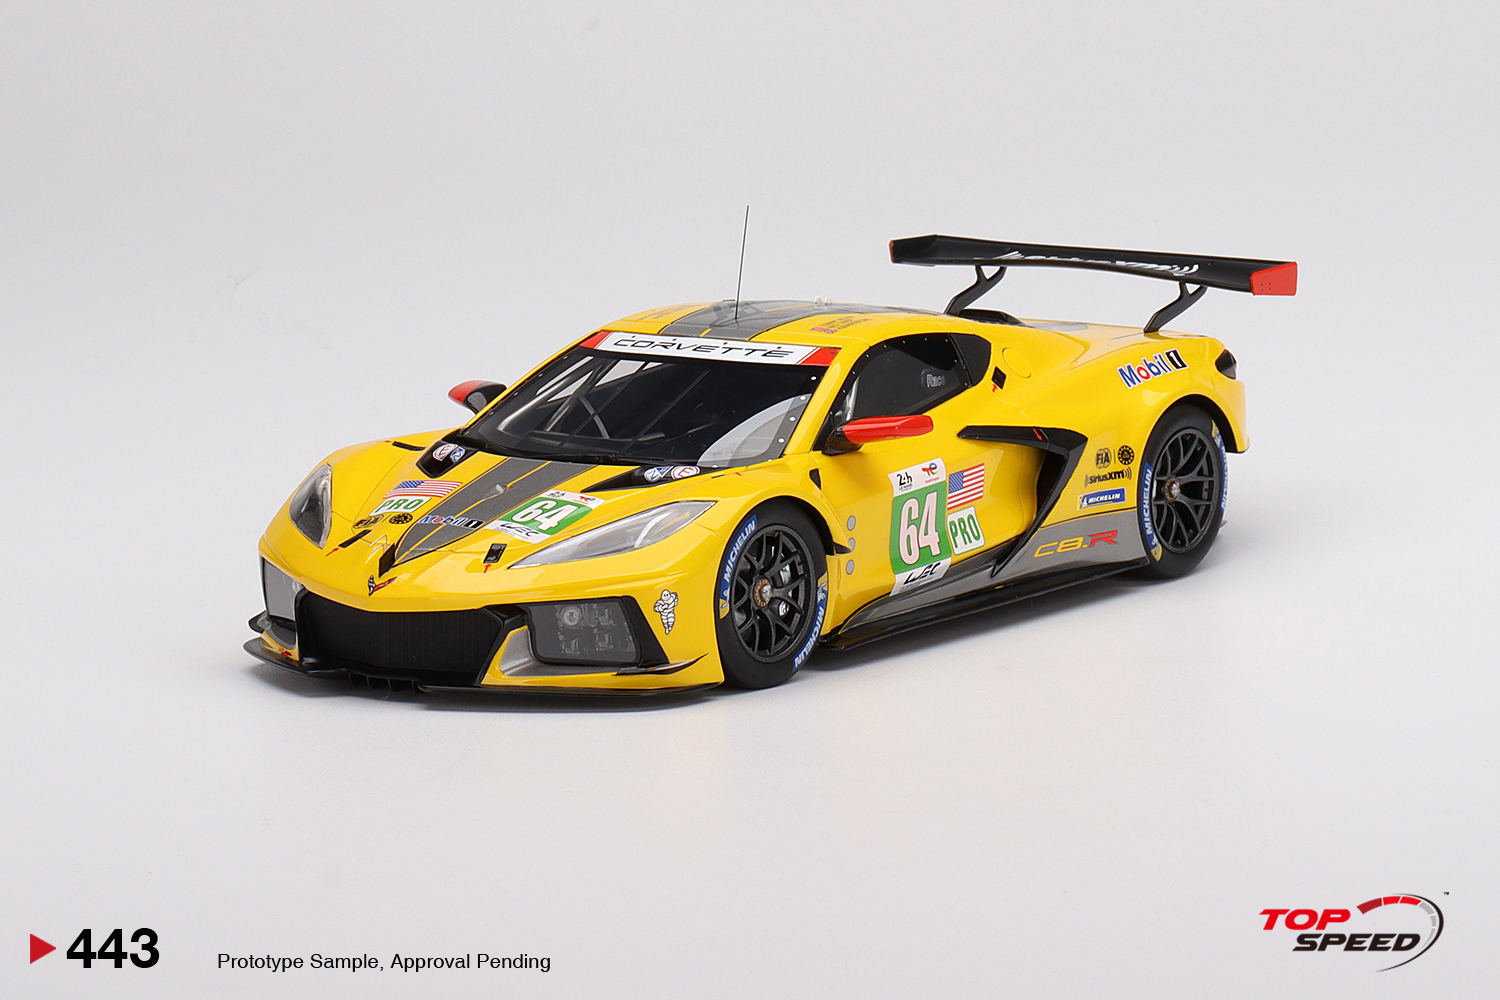 Chevrolet Corvette C8.R #64 Corvette Racing 2022 Le Mans 24 Hrs Driven by: Tommy Milner, Nick Tandy, Alexander Sims /TopSpeed TS0443 1:18/